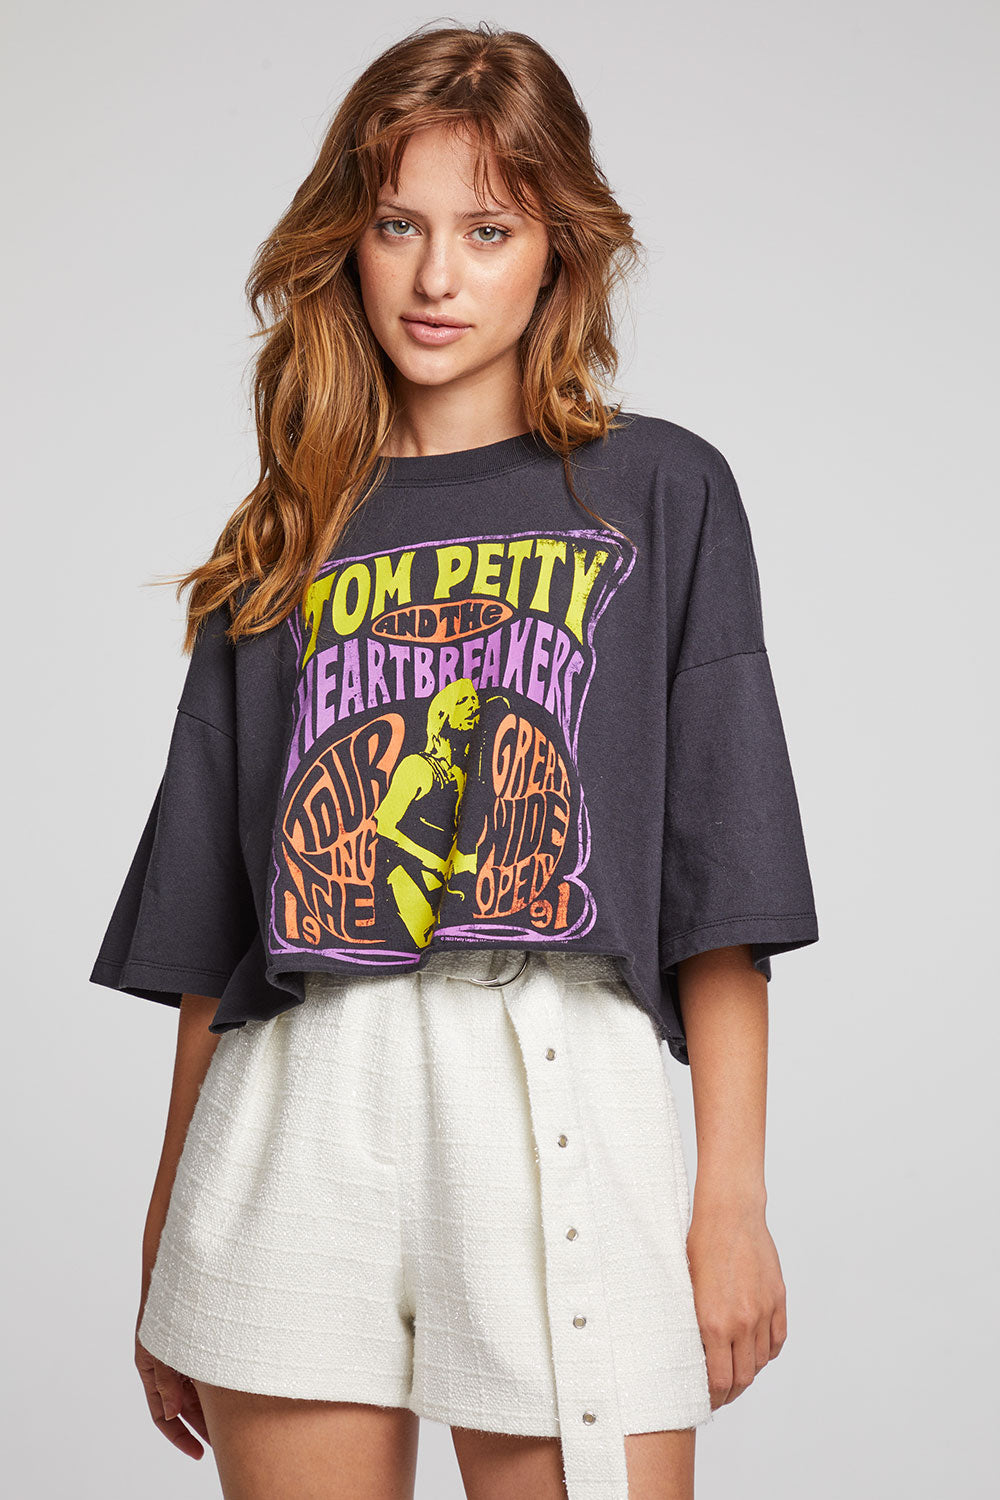 Tom Petty Great Wide Open Tour Tee